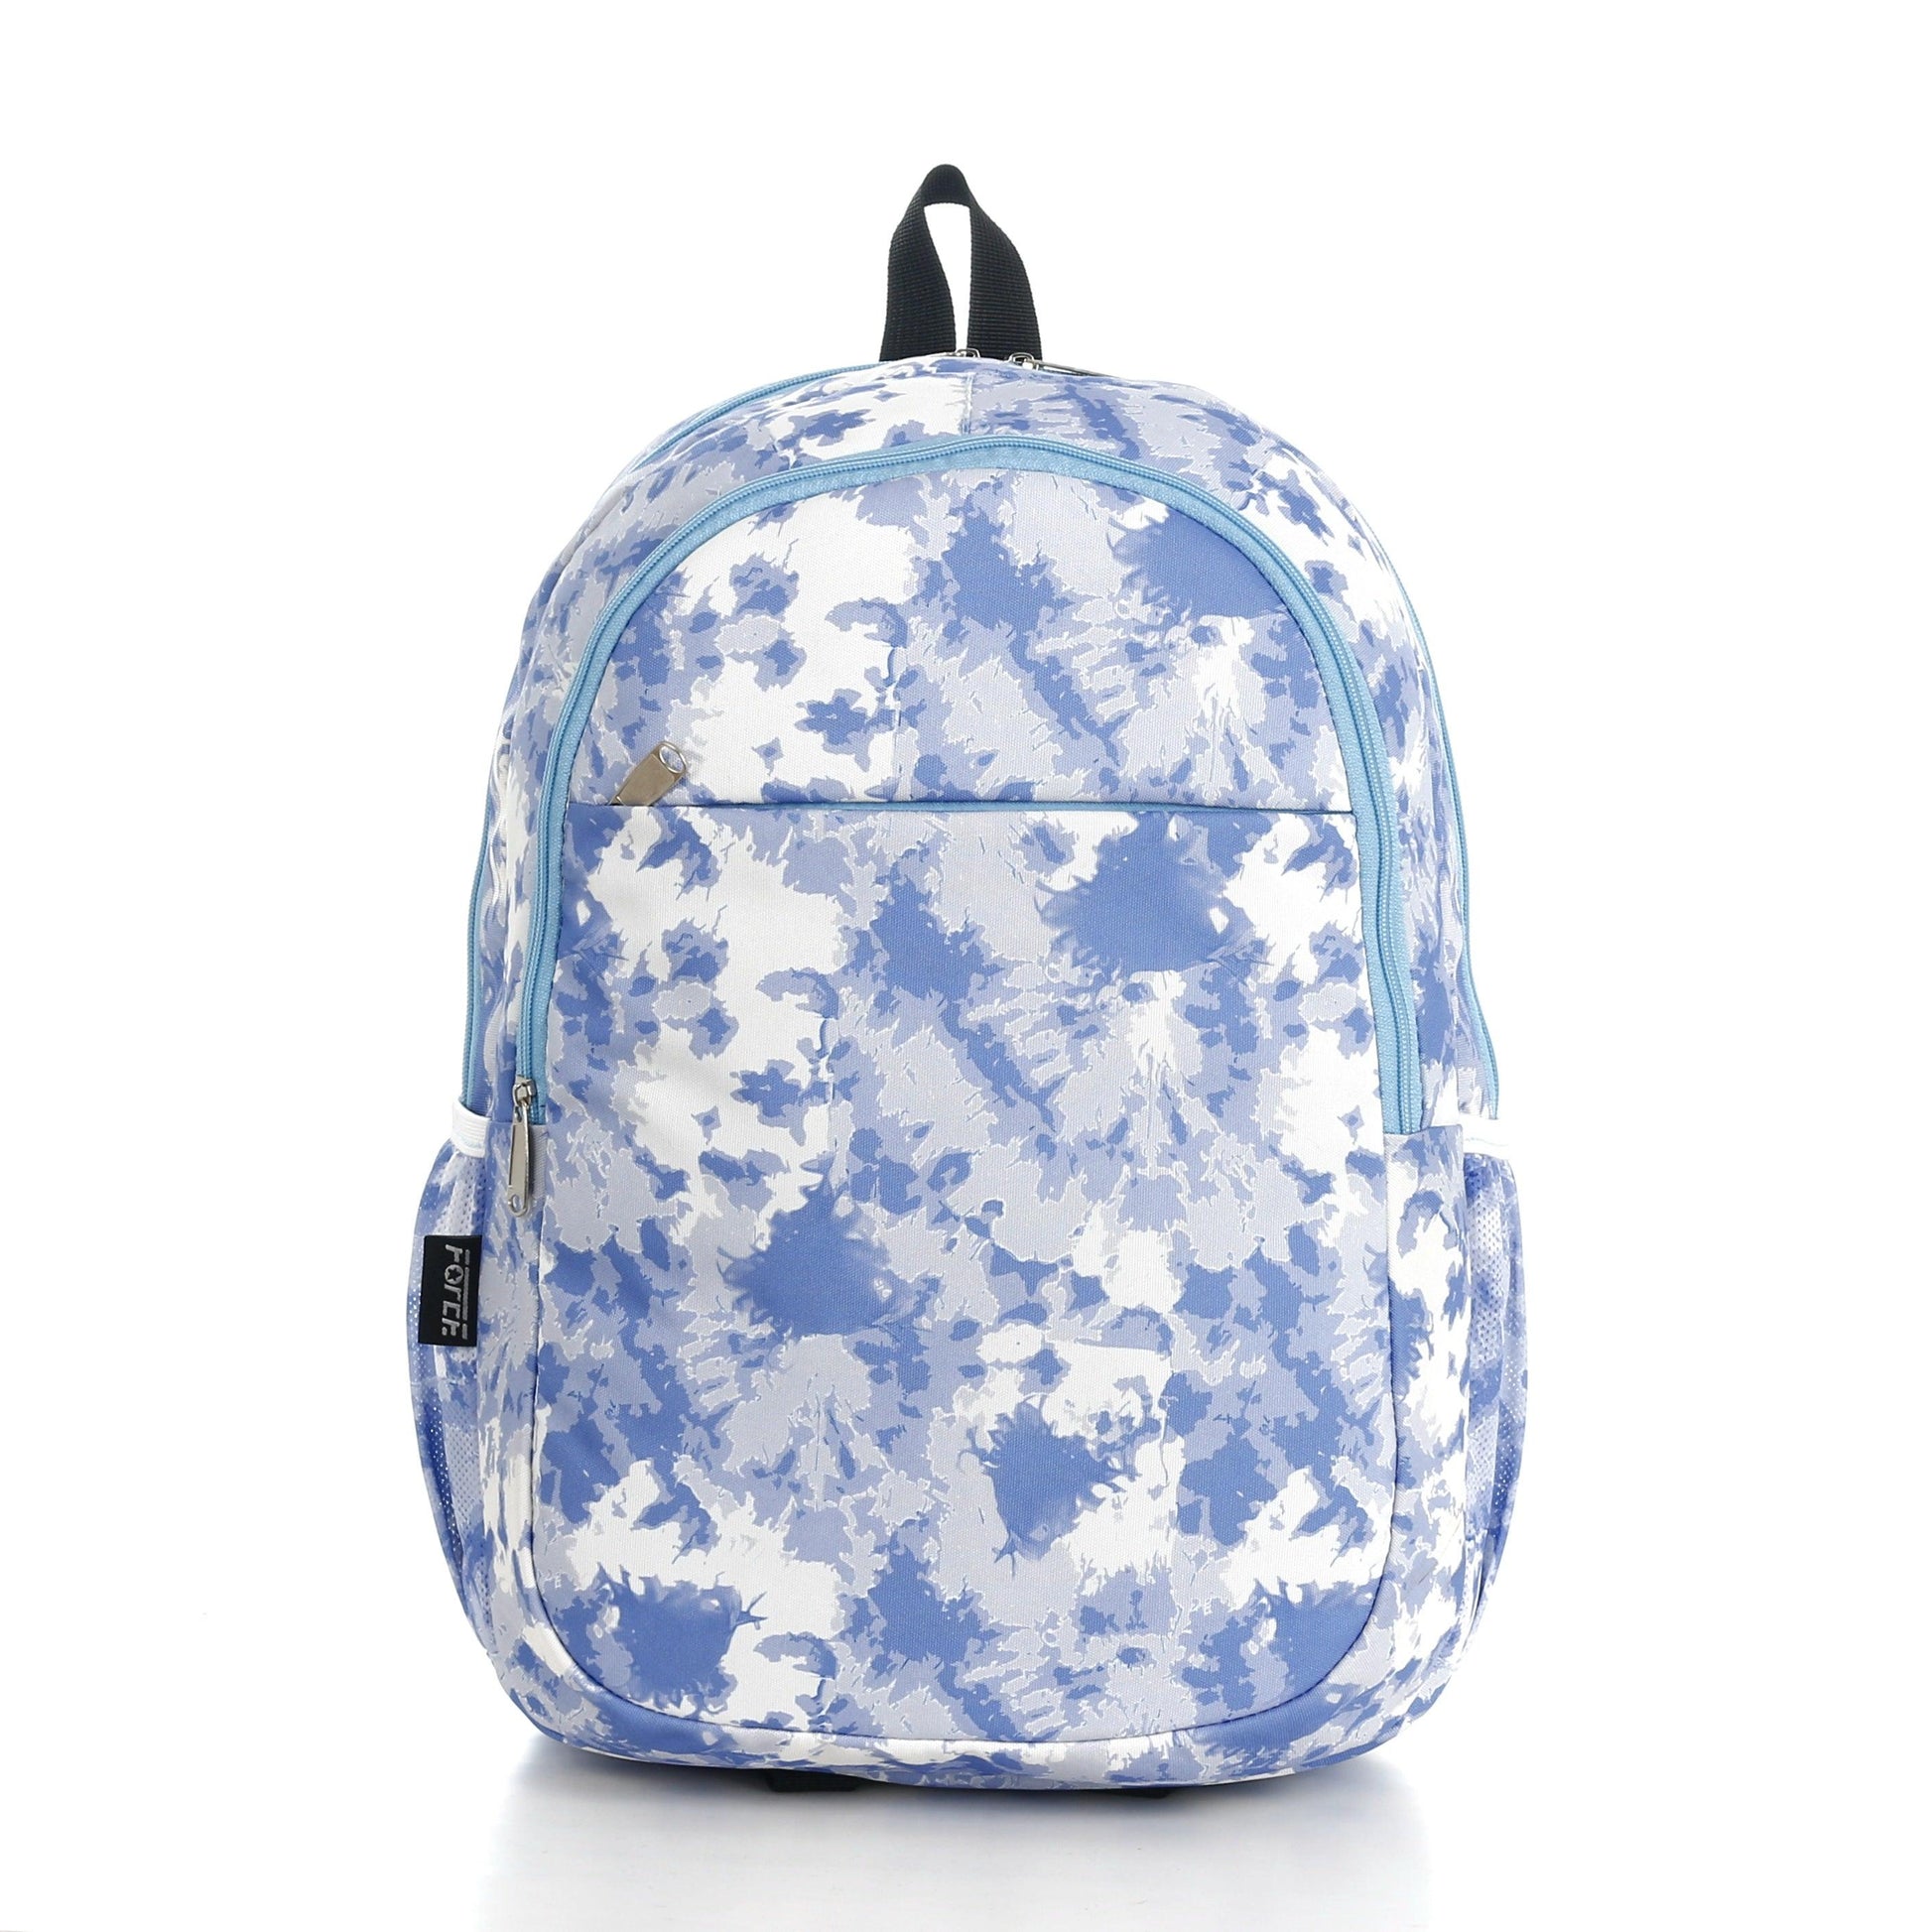 Force Backpack Unisex -Sky colors pattern - new edition - FNE-004 - FORCE STORES